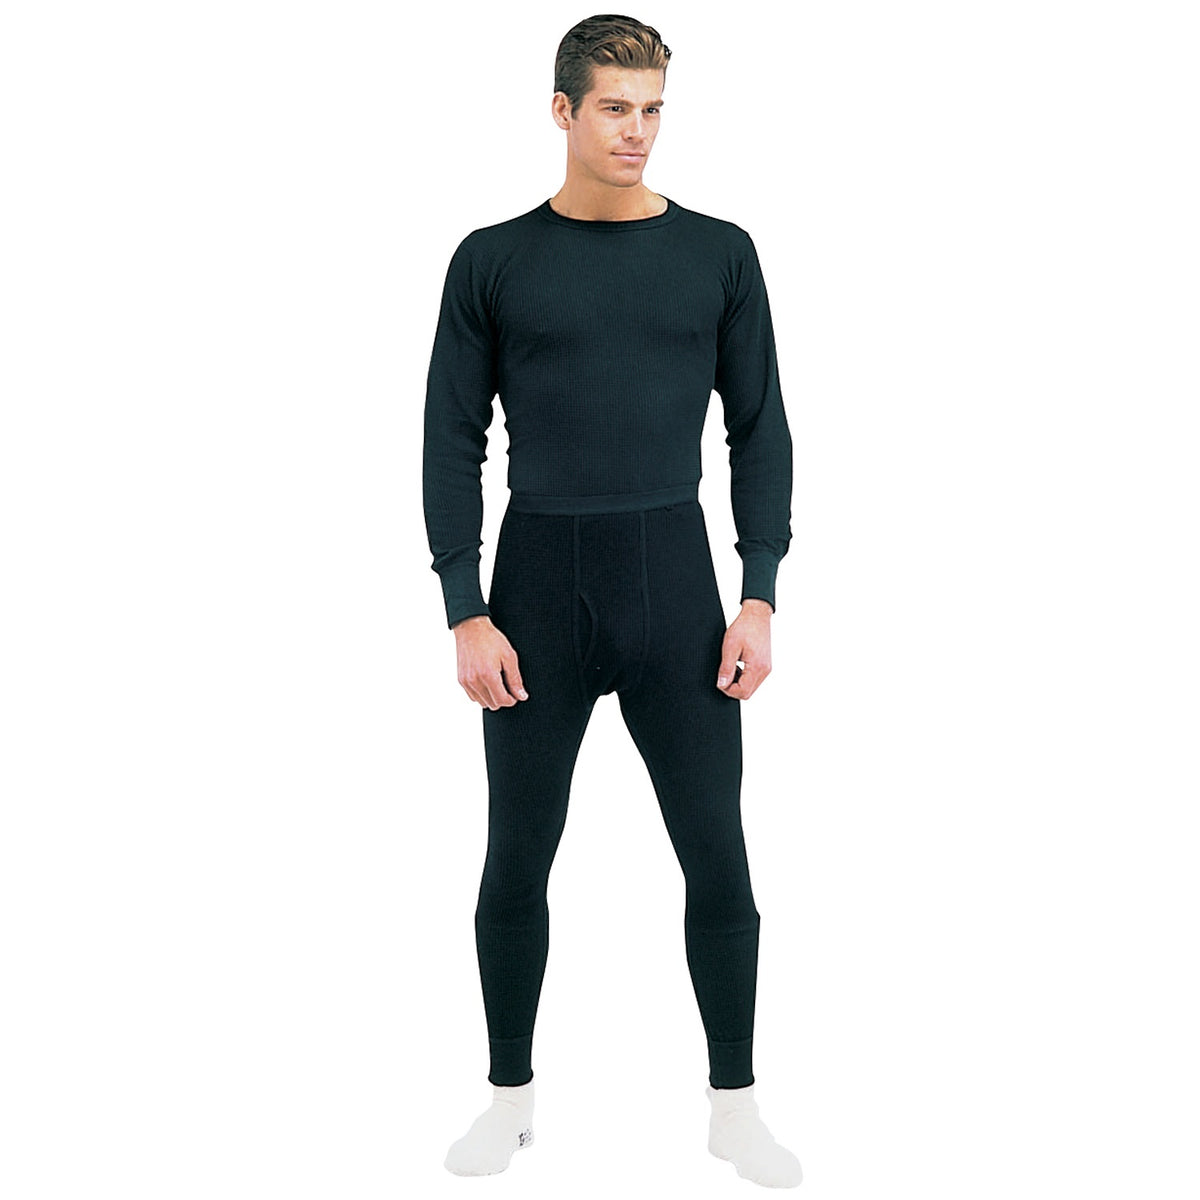 Rothco Thermal Knit Underwear Bottoms Black